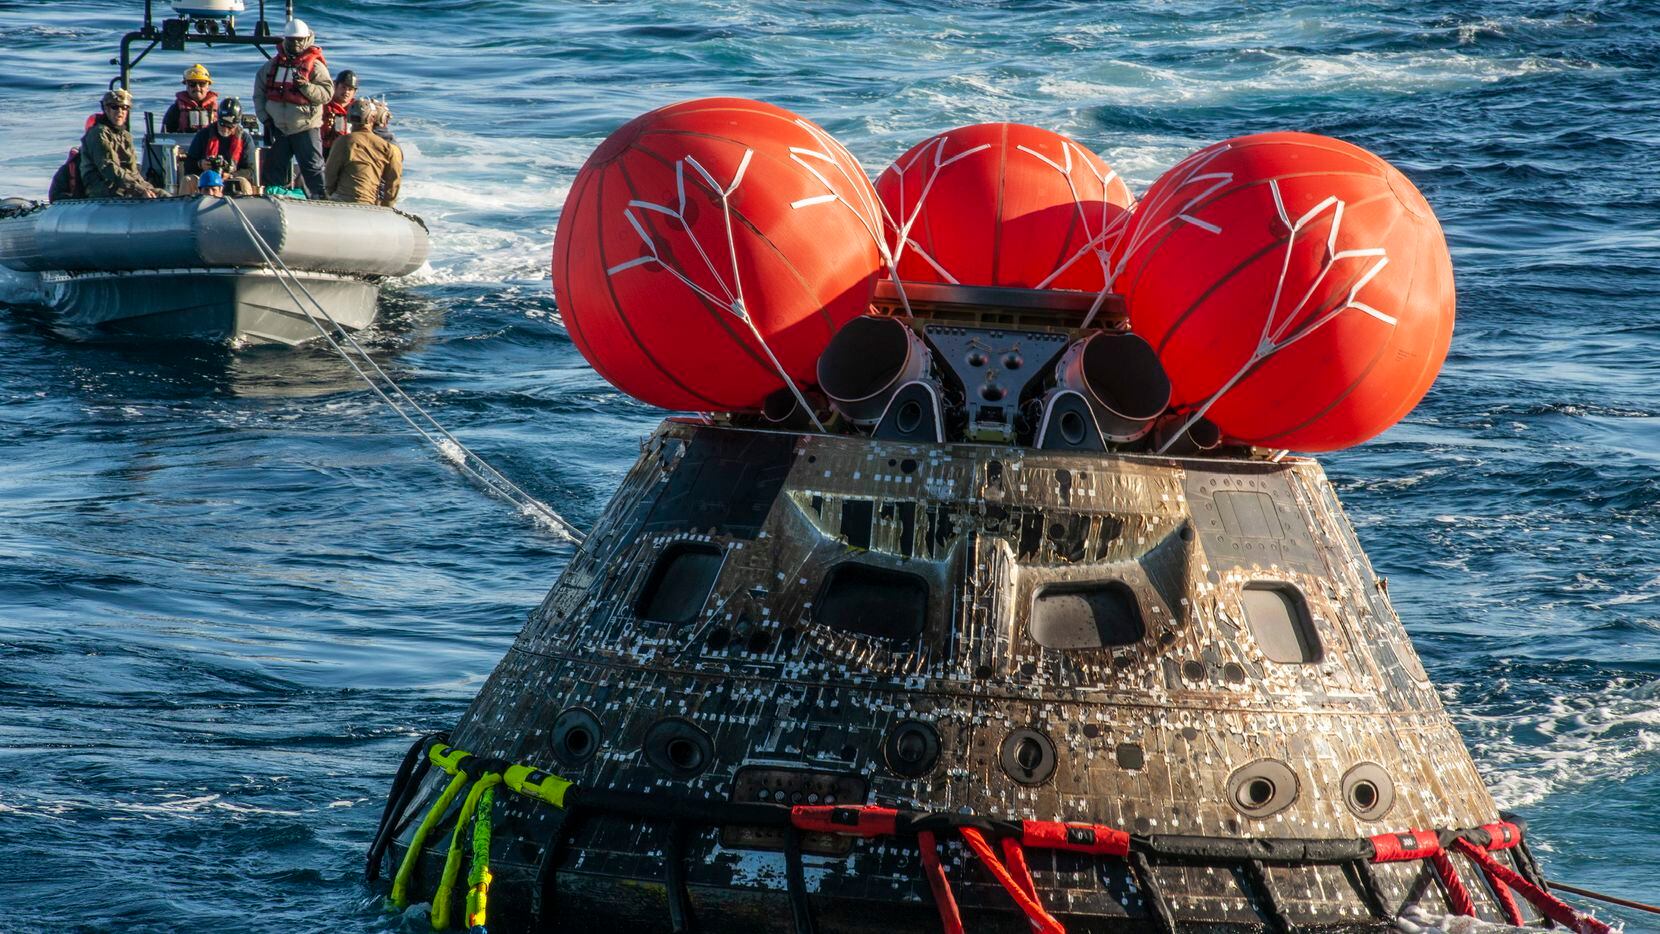 NASA's Orion spacecraft for the Artemis I mission was successfully recovered Monday inside...